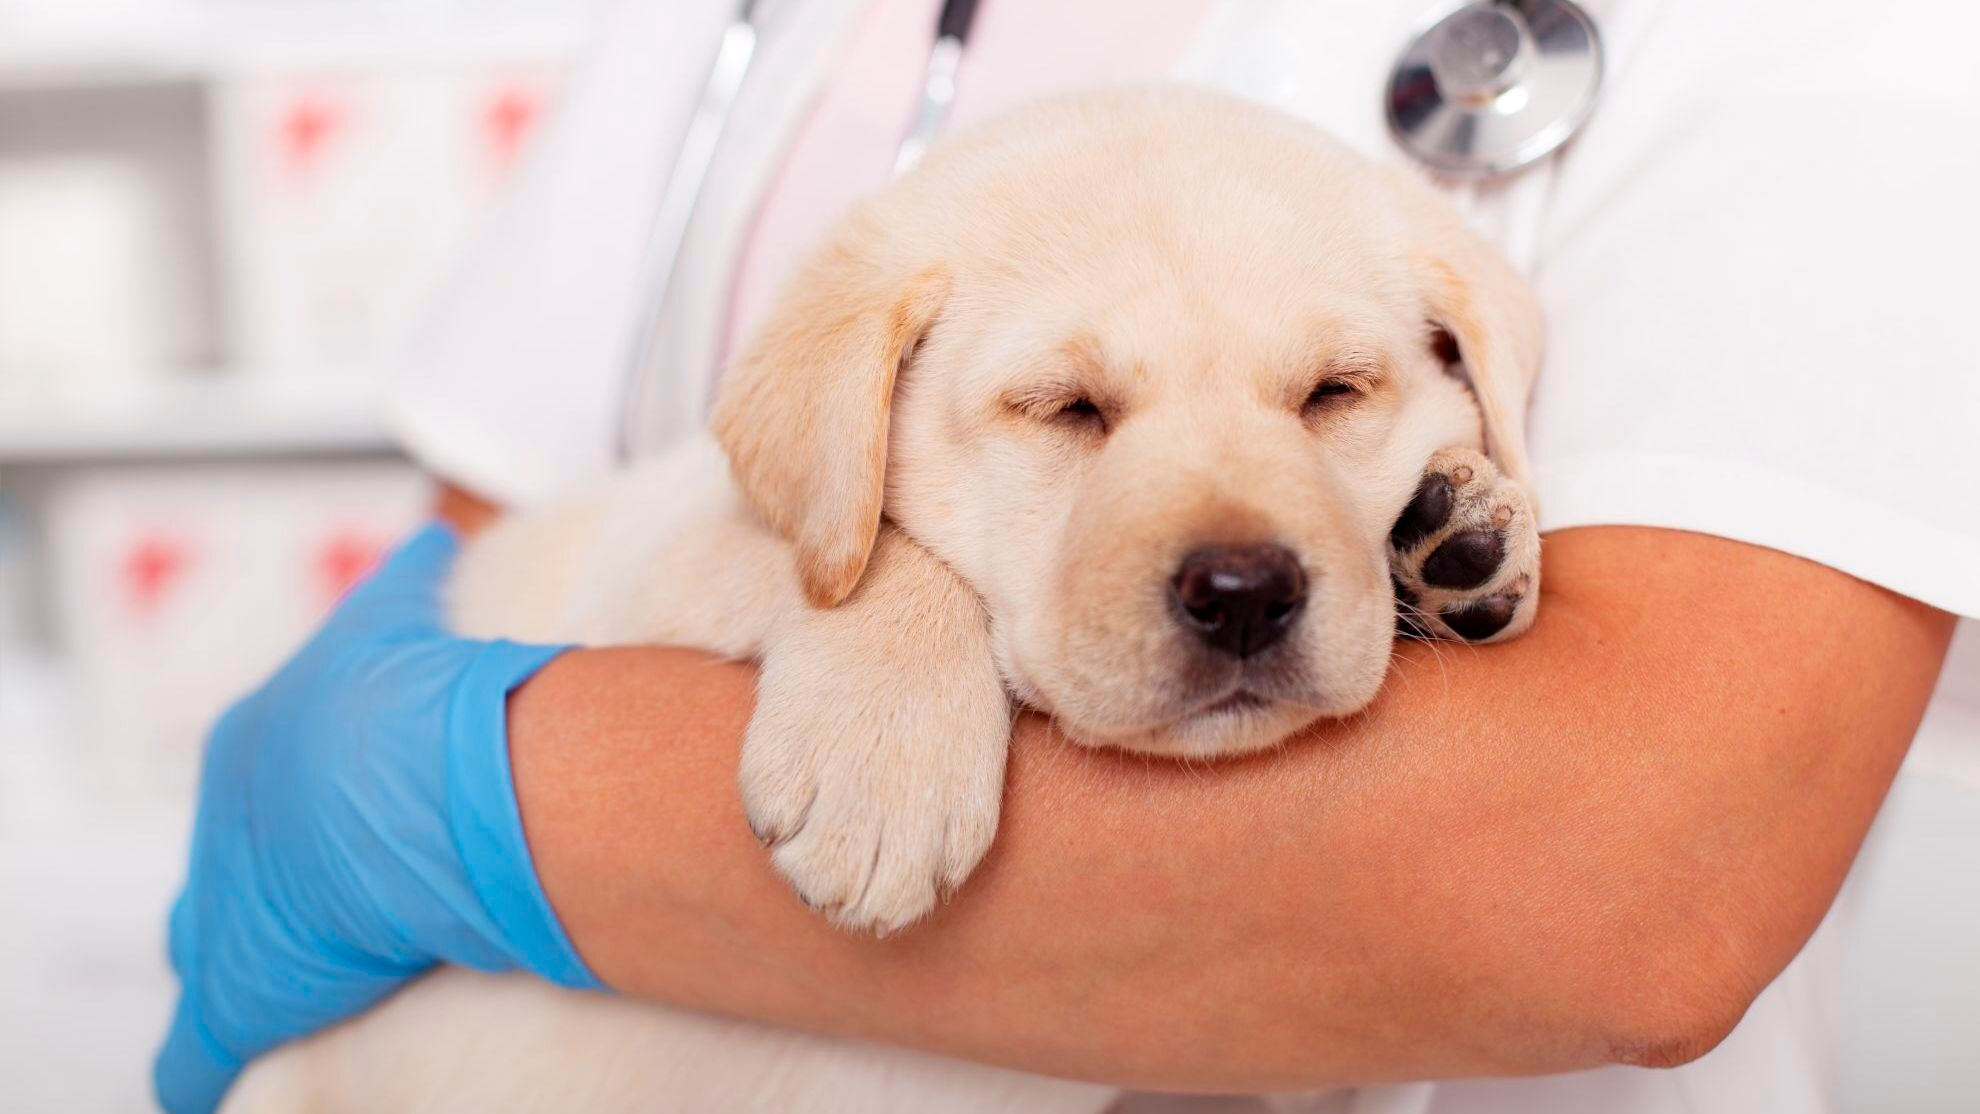  labrador puppy dog ​​asleep in the arms of a veterinary health professional